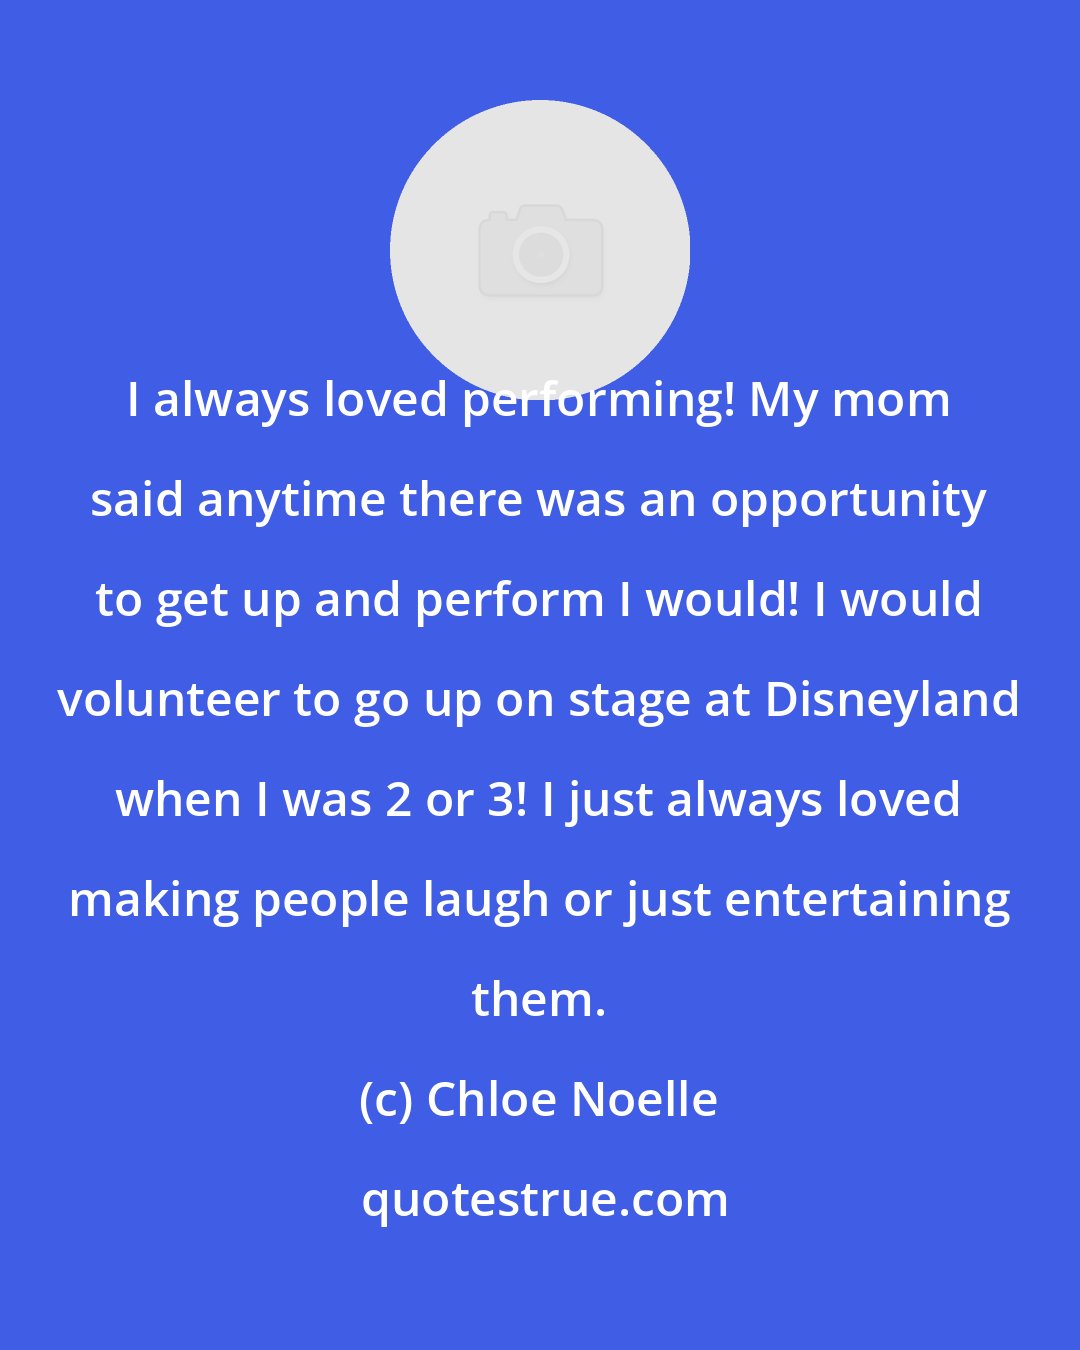 Chloe Noelle: I always loved performing! My mom said anytime there was an opportunity to get up and perform I would! I would volunteer to go up on stage at Disneyland when I was 2 or 3! I just always loved making people laugh or just entertaining them.